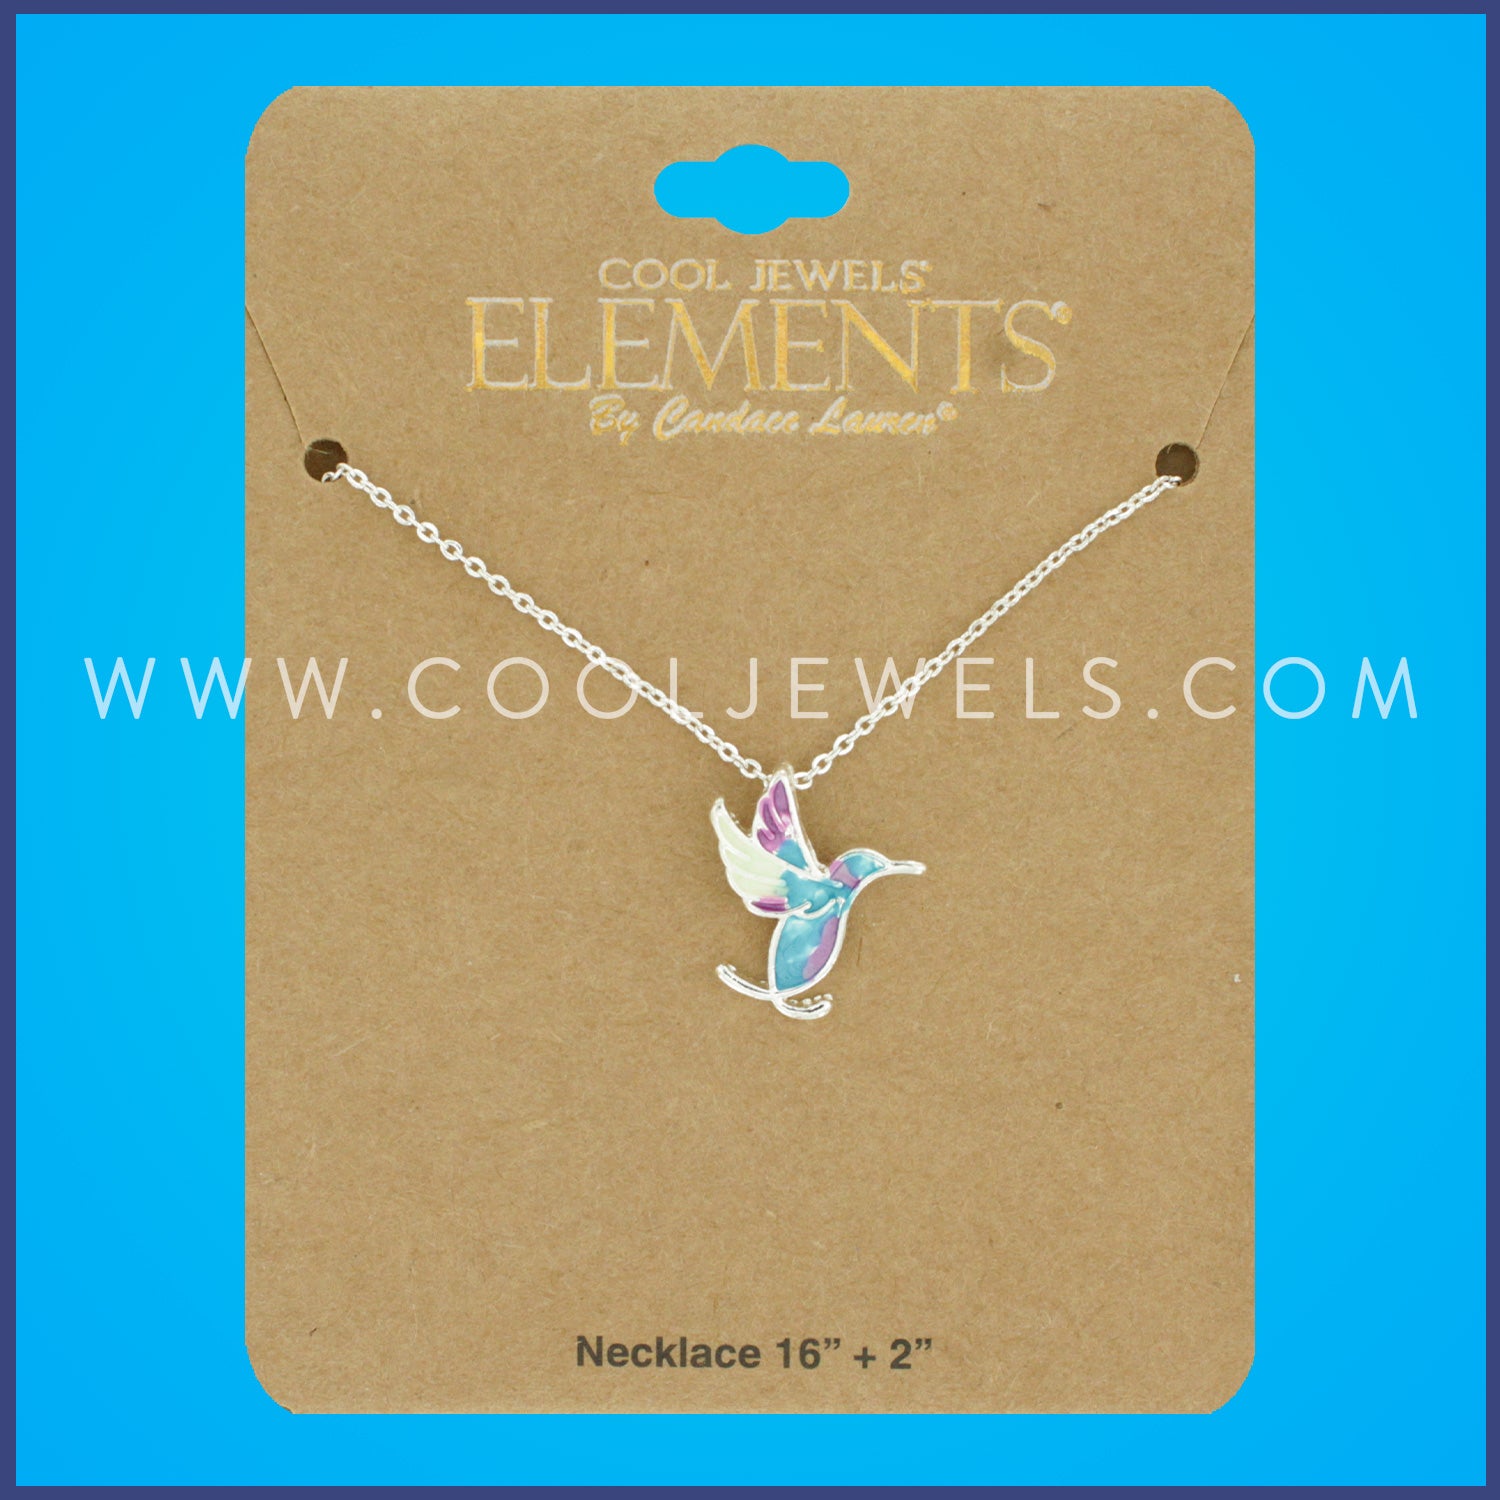 SILVER CHAIN NECKALCE WITH BLUE HUMMINGBIRD PENDANT - CARDED